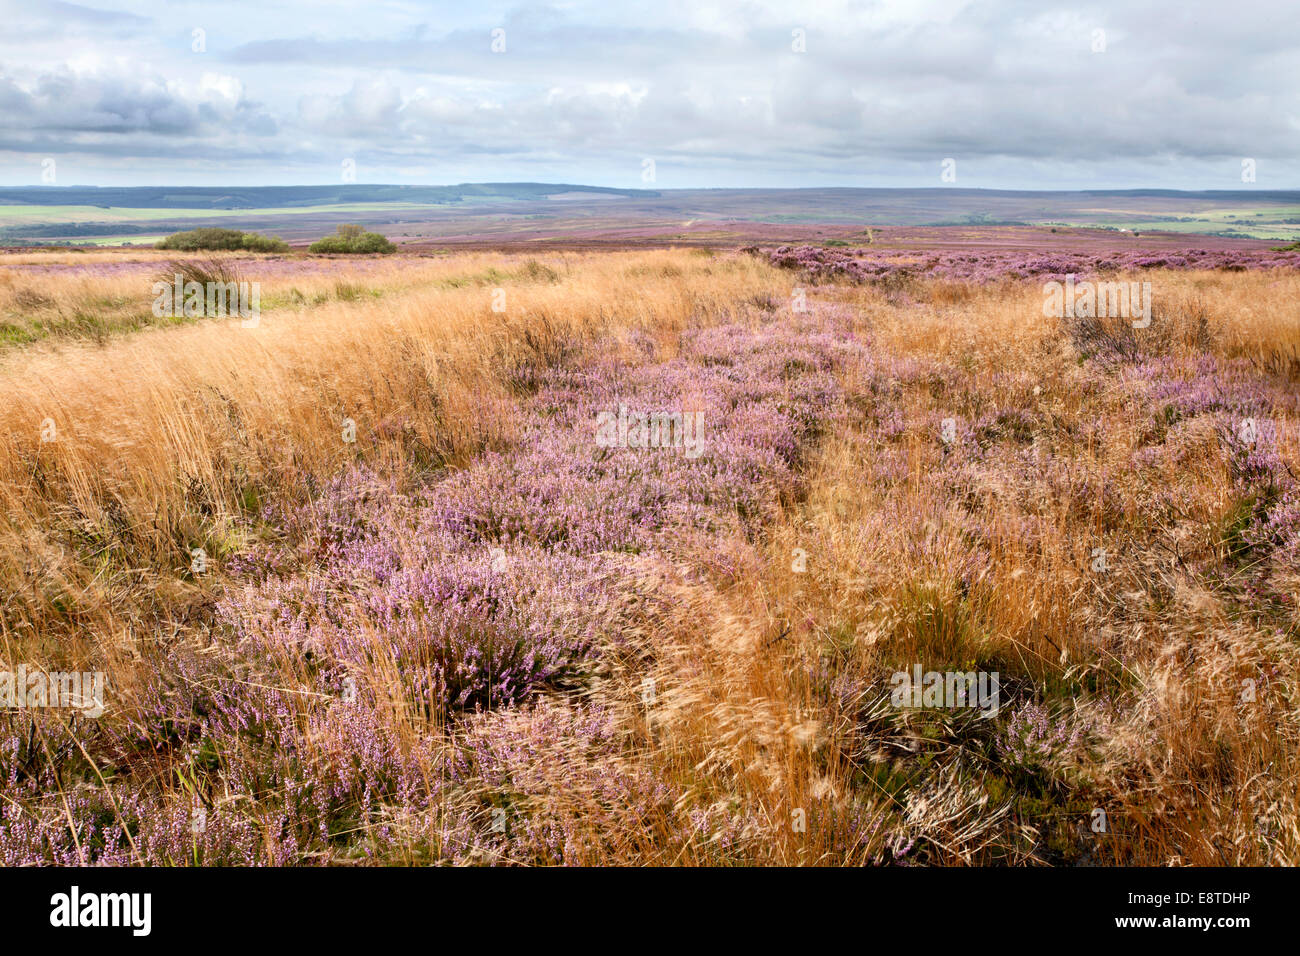 Heather and Grasses in the Wind on Brow Moor near Ravenscar North York Moors Yorkshire England Stock Photo